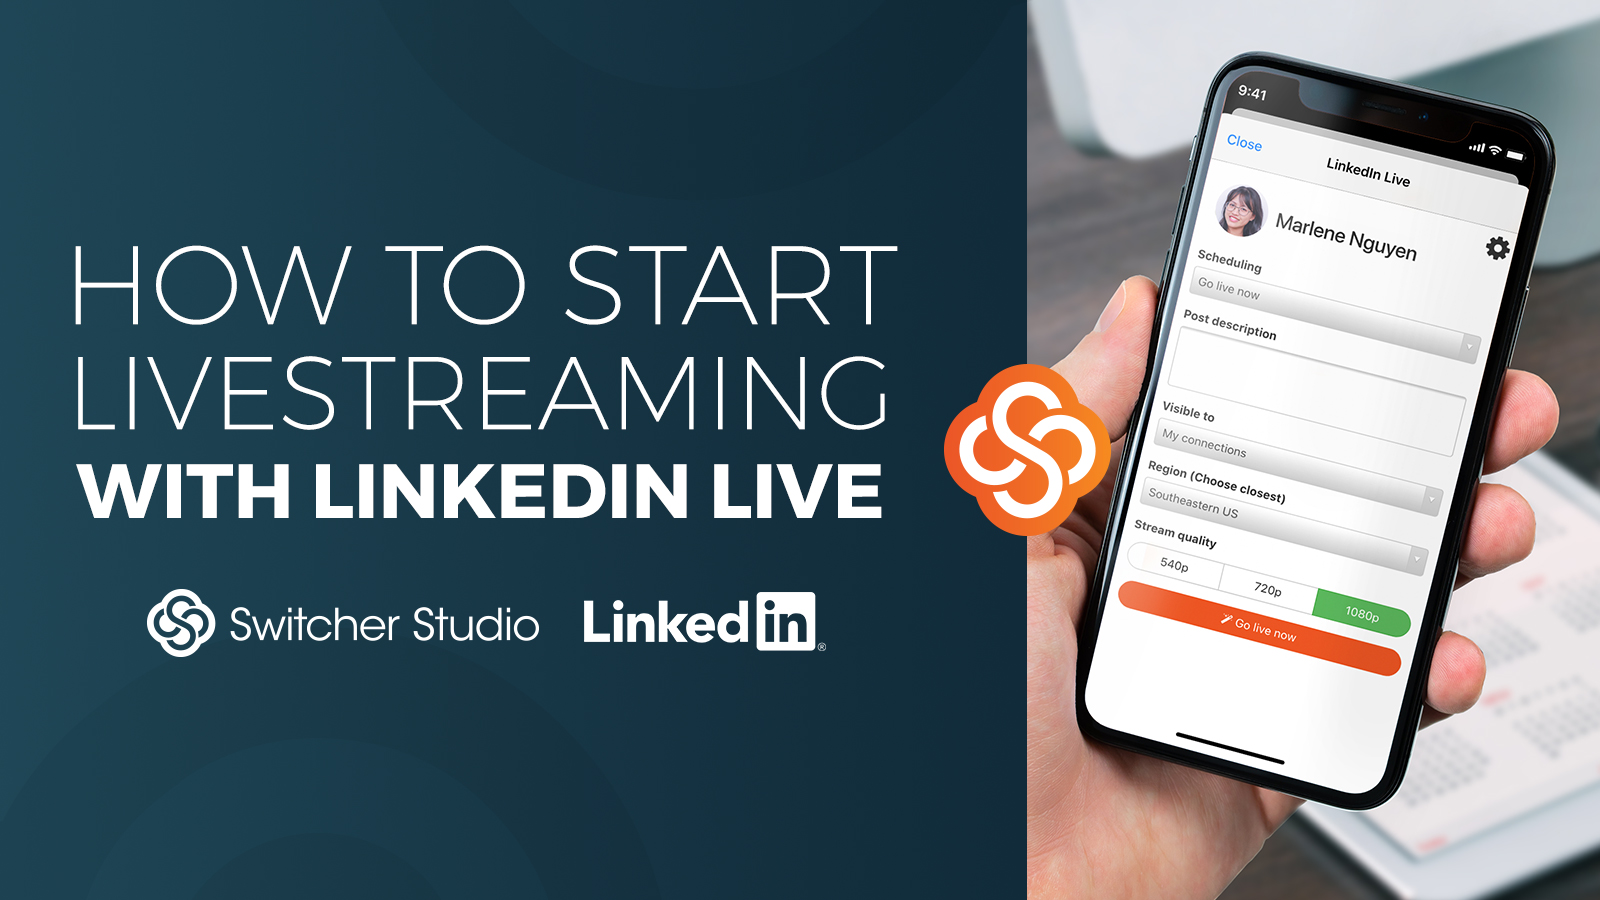 How to Start Livestreaming With LinkedIn Live